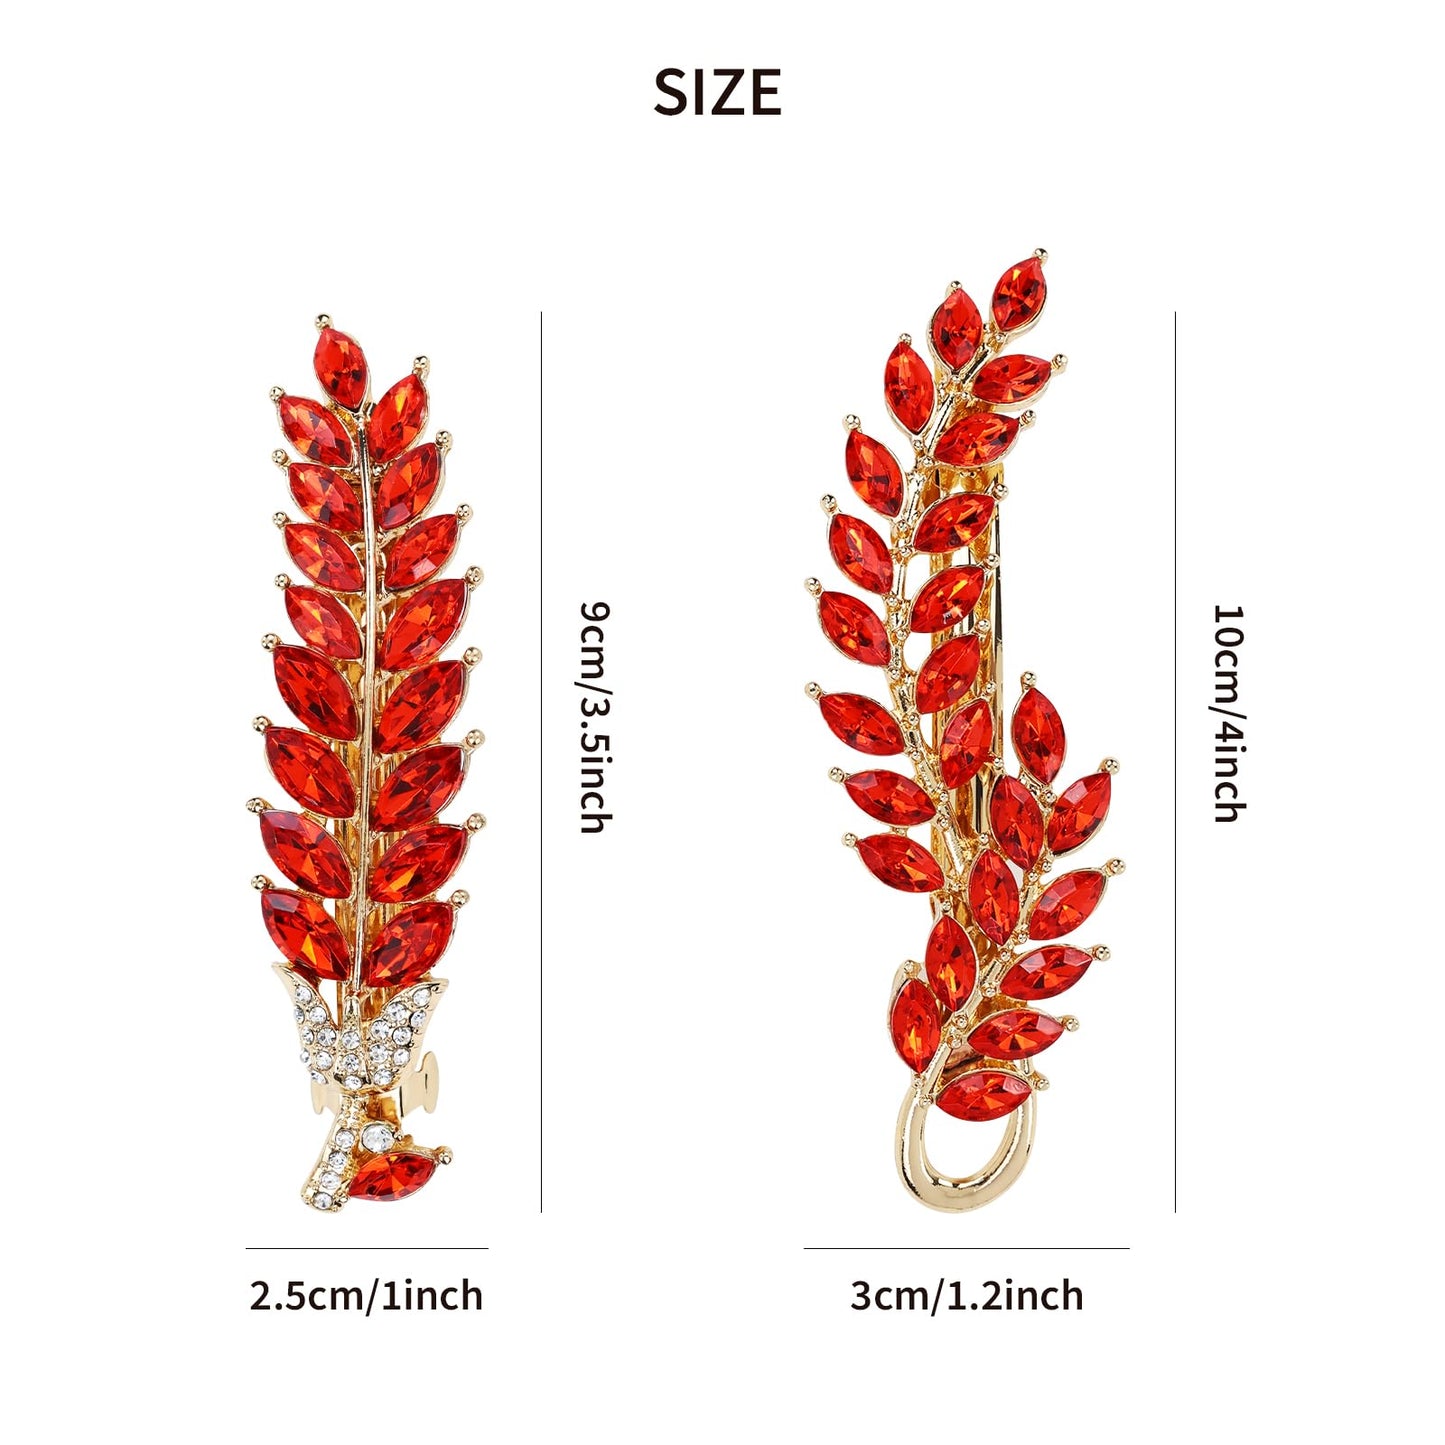 Dizila 6 Pack Gold Metal Dazzling Rhinestone Crystal Leaf French Barrettes Hair Clips Automatic Spring Clips Hair Pins Accessories for Women Girls Thin Thick Hair